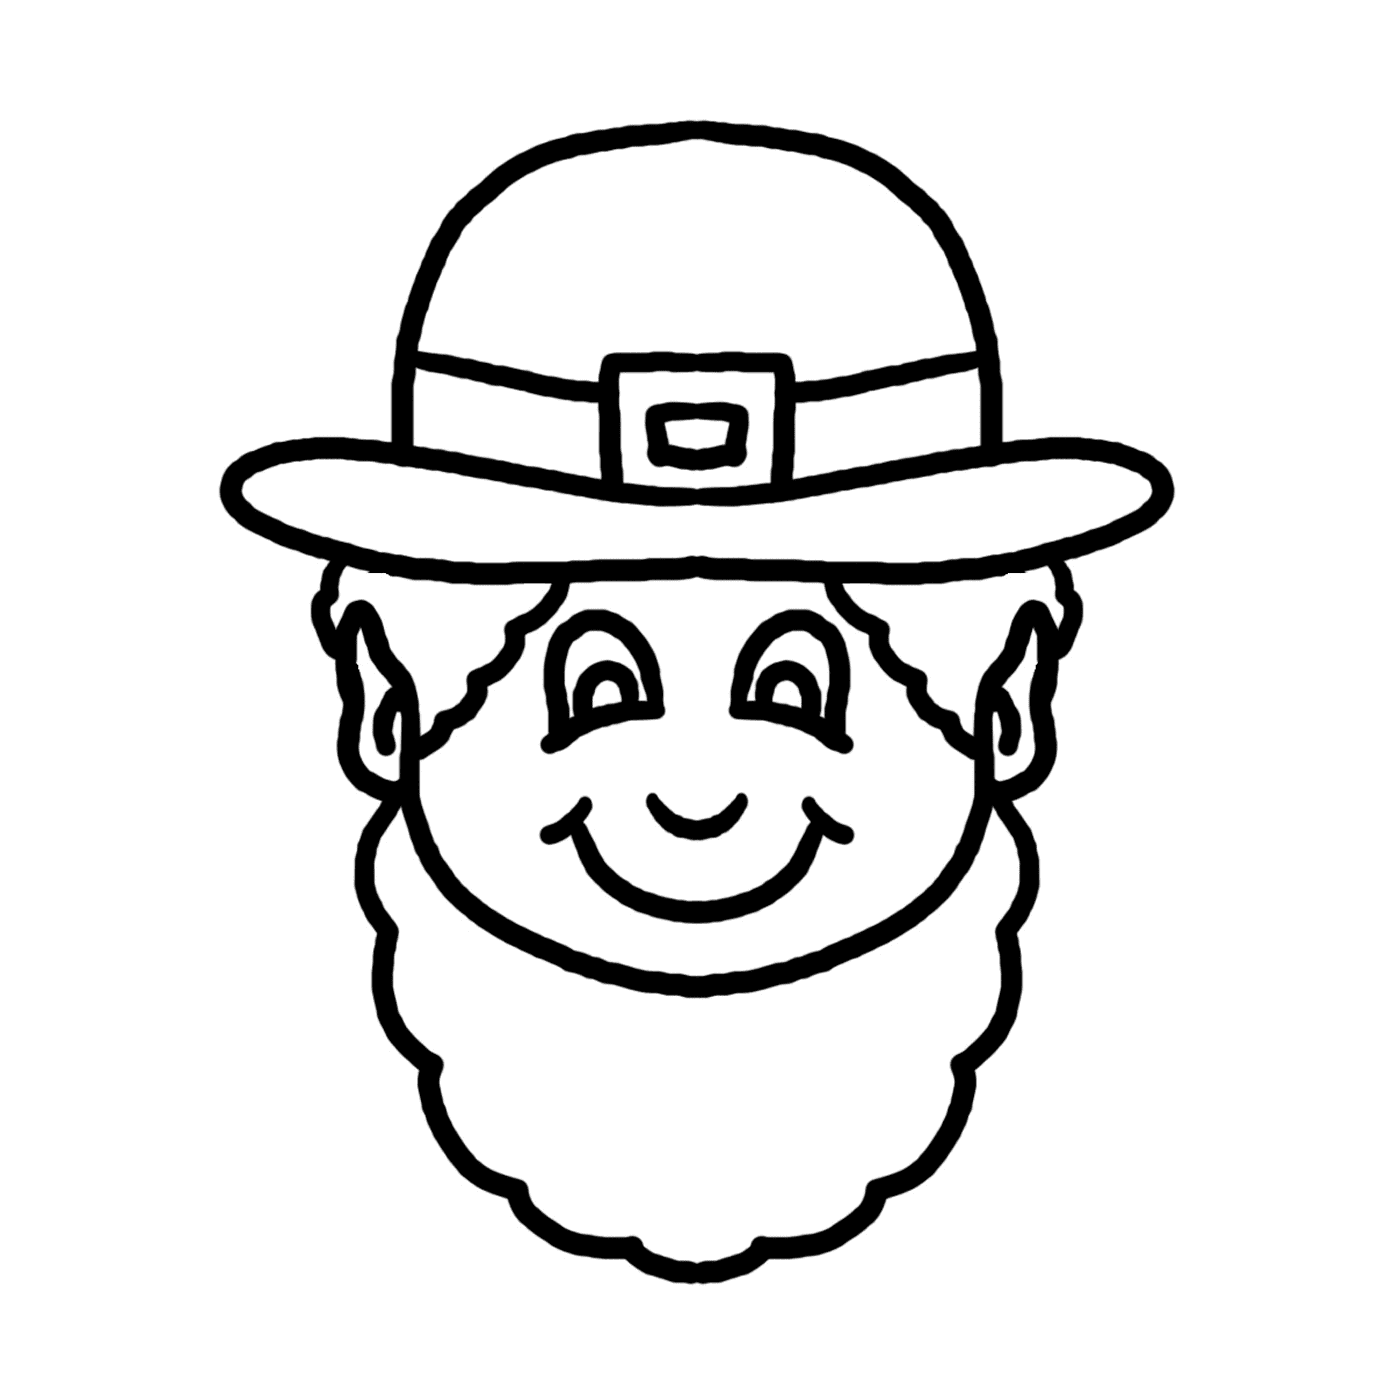  Face of leprechaun in black and white 